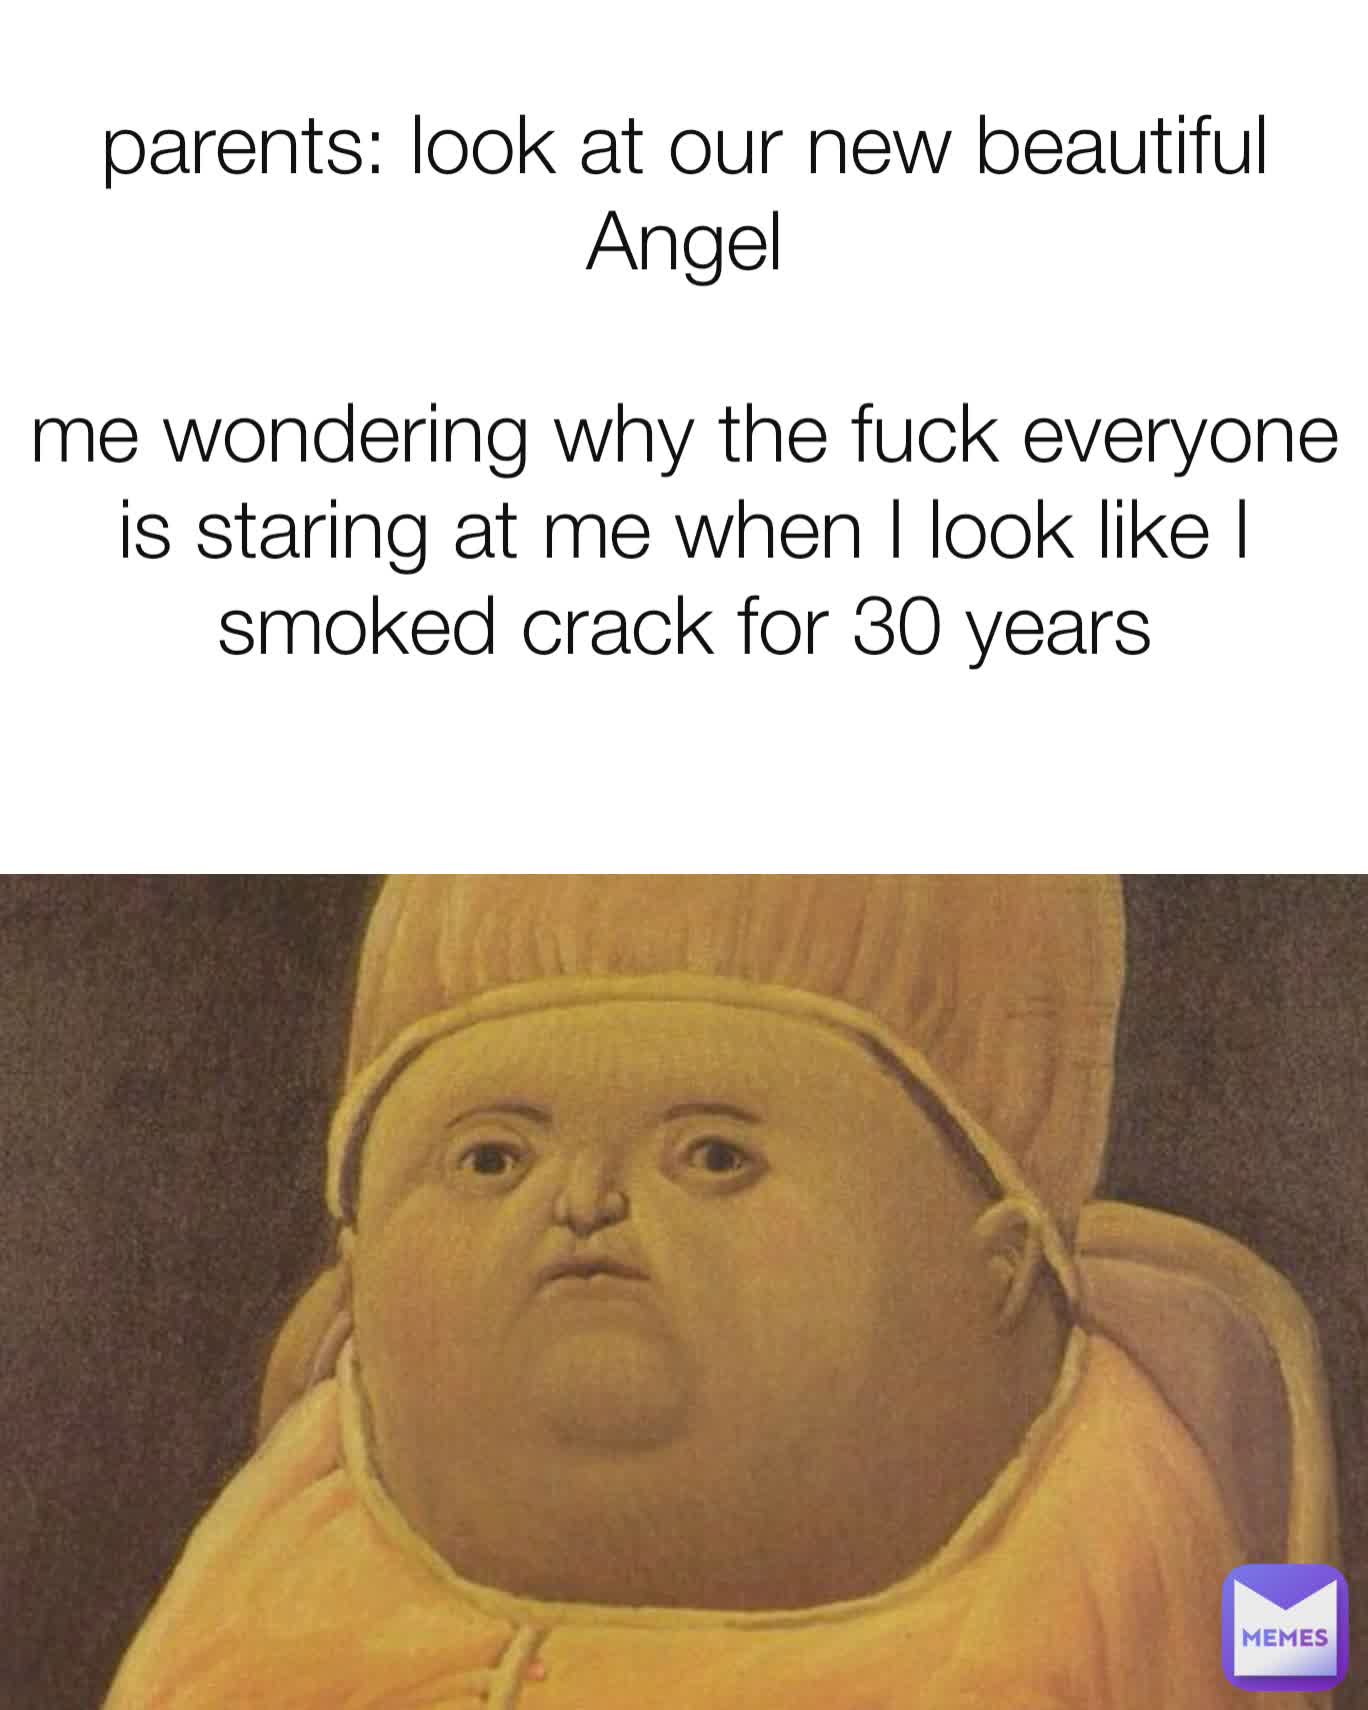 parents: look at our new beautiful Angel

me wondering why the fuck everyone is staring at me when I look like I smoked crack for 30 years
